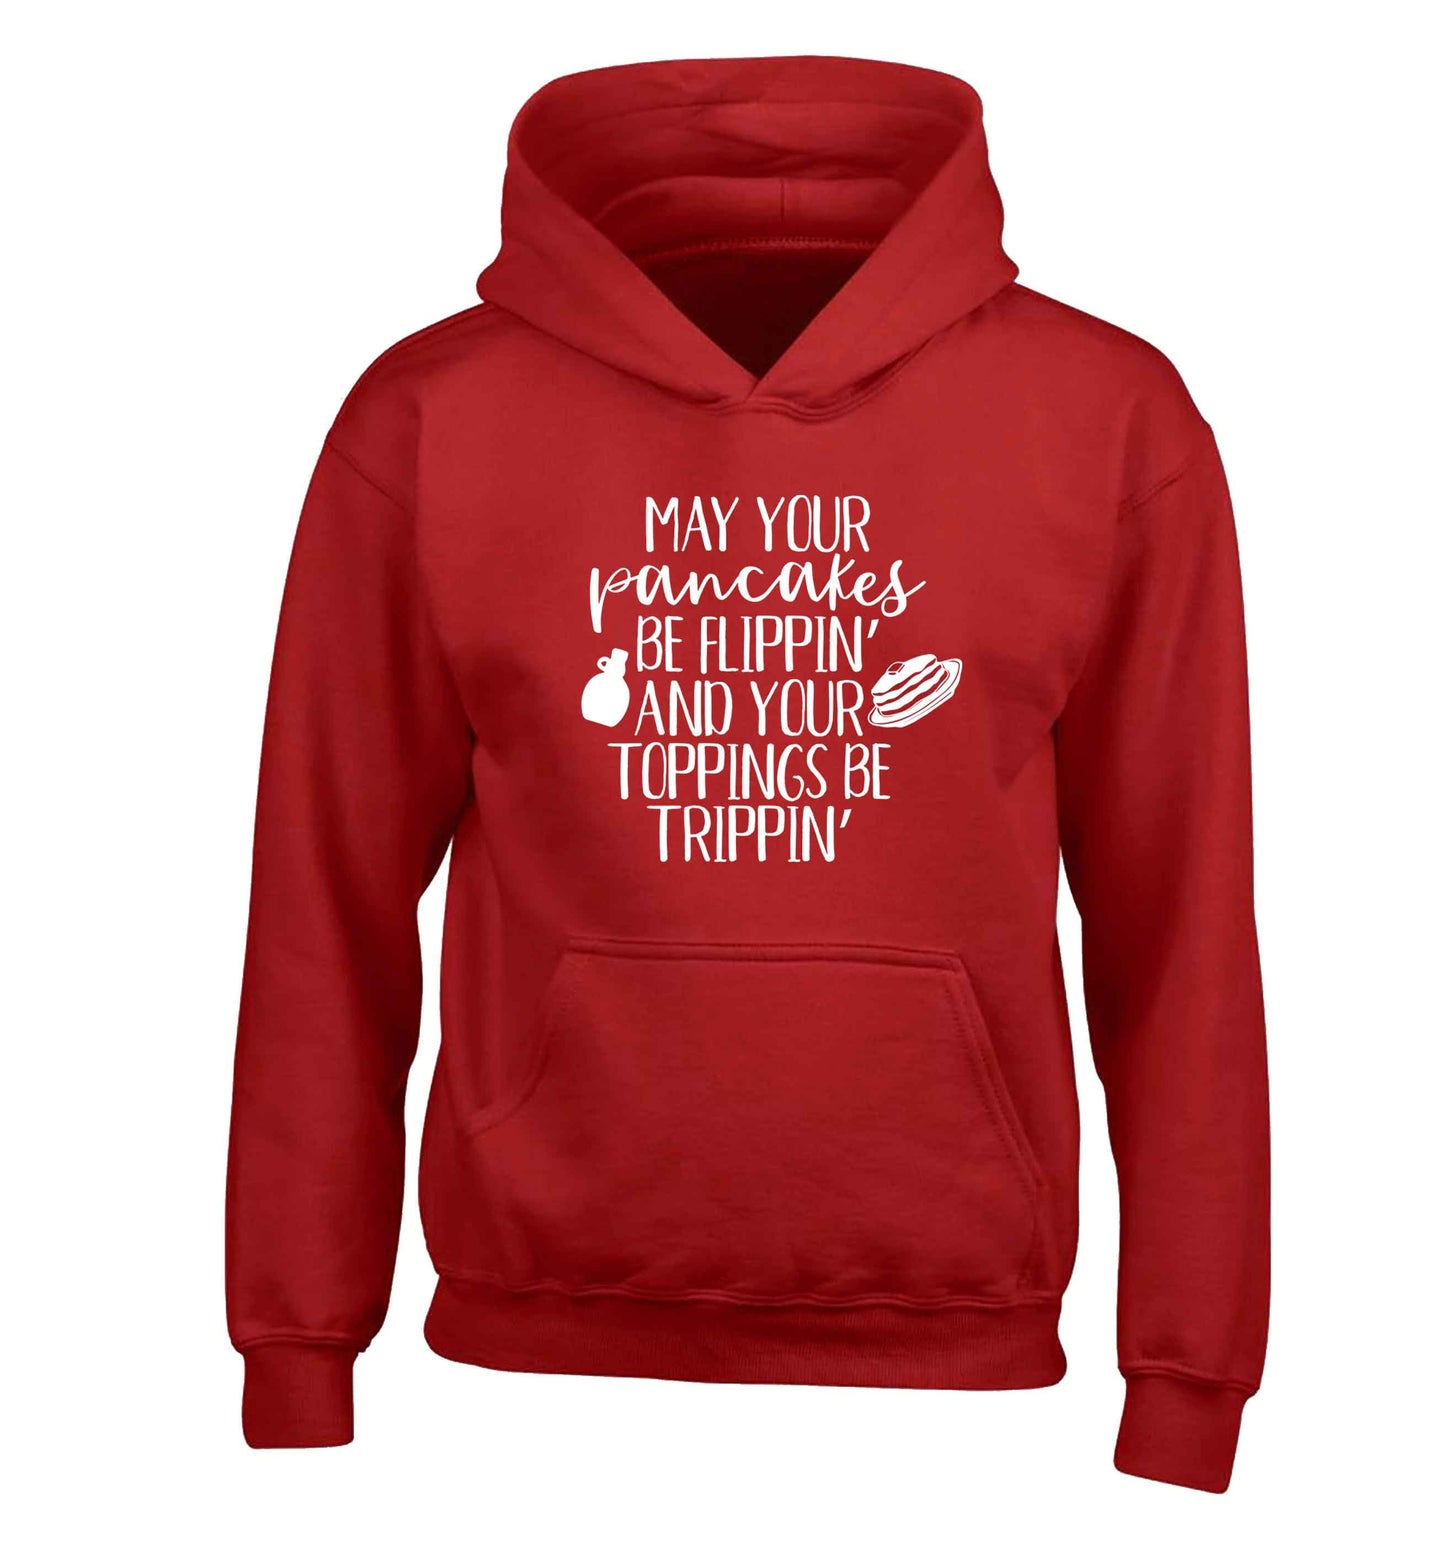 May your pancakes be flippin' and your toppings be trippin' children's red hoodie 12-13 Years